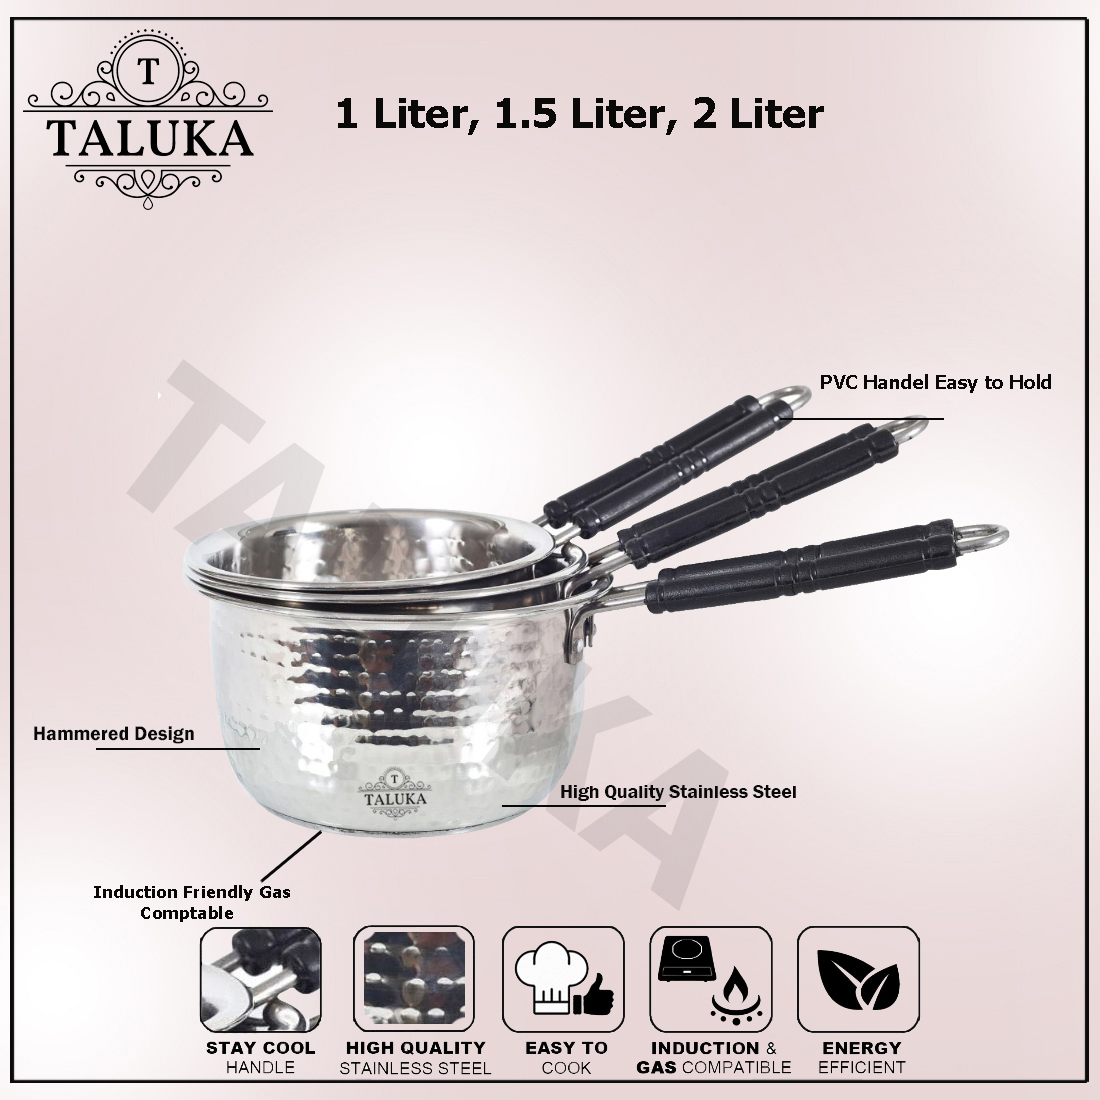 Premium Stainless Steel Hammered Inductions Friendly Sauce Pan Set of 3-1, 1.5, 2 Liter in Use for Hotel Home Restaurant